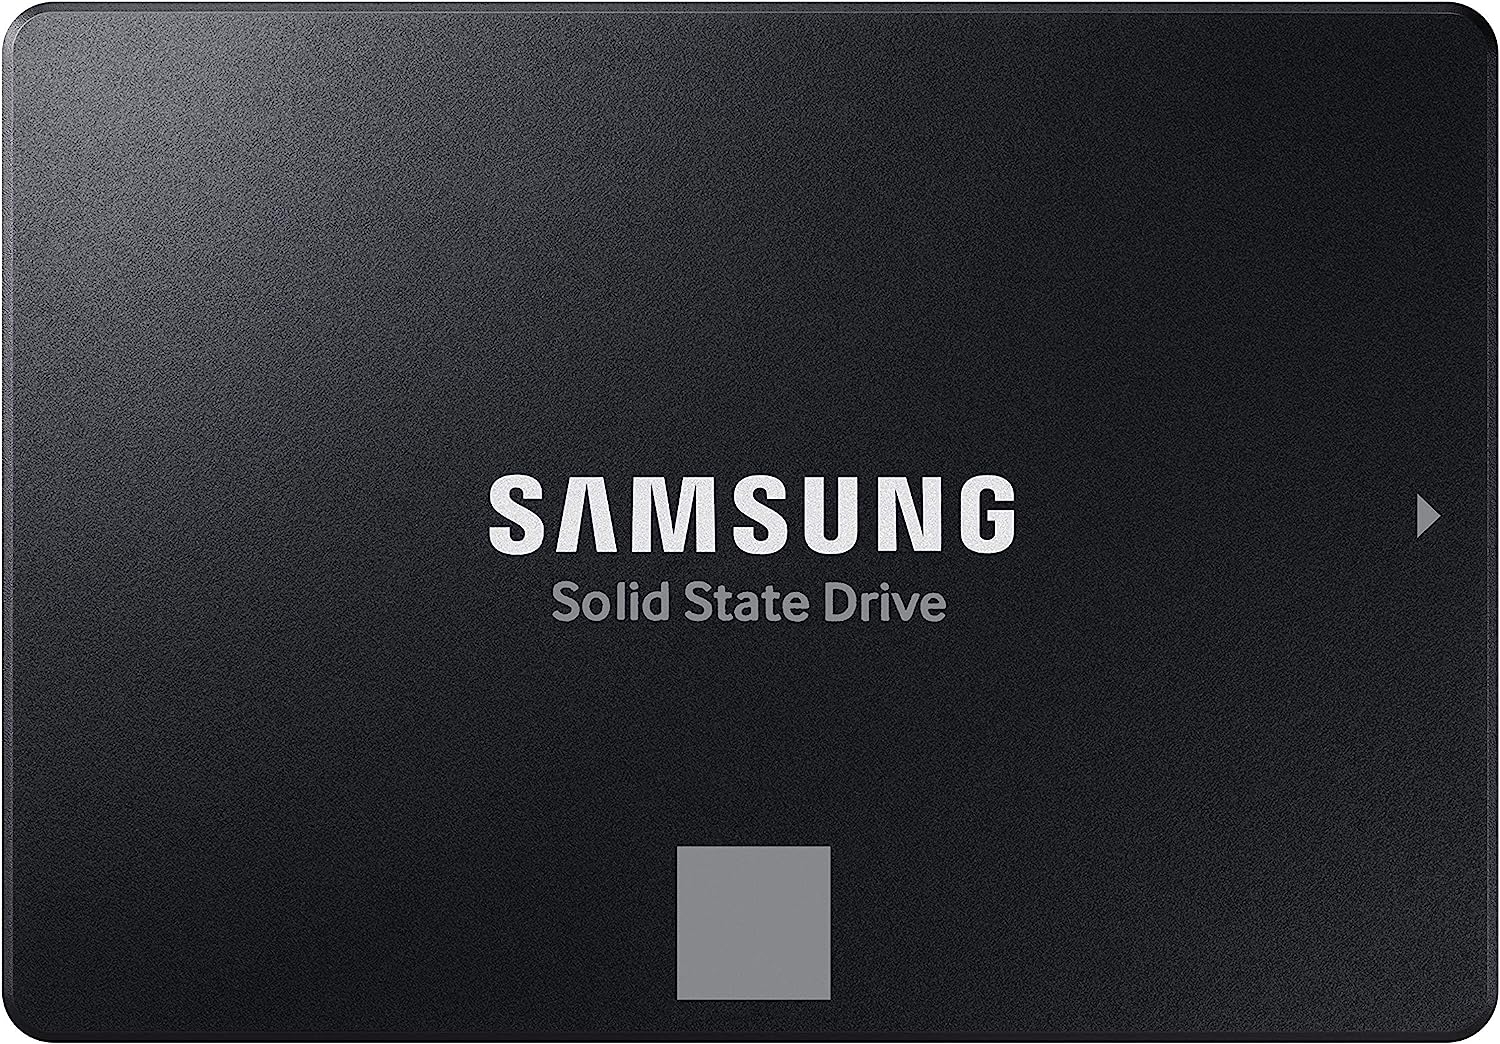 SAMSUNG 870 EVO SATA III SSD 1TB 2.5” Internal Solid State Drive, Upgrade PC or Laptop Memory and Storage for IT Pros,